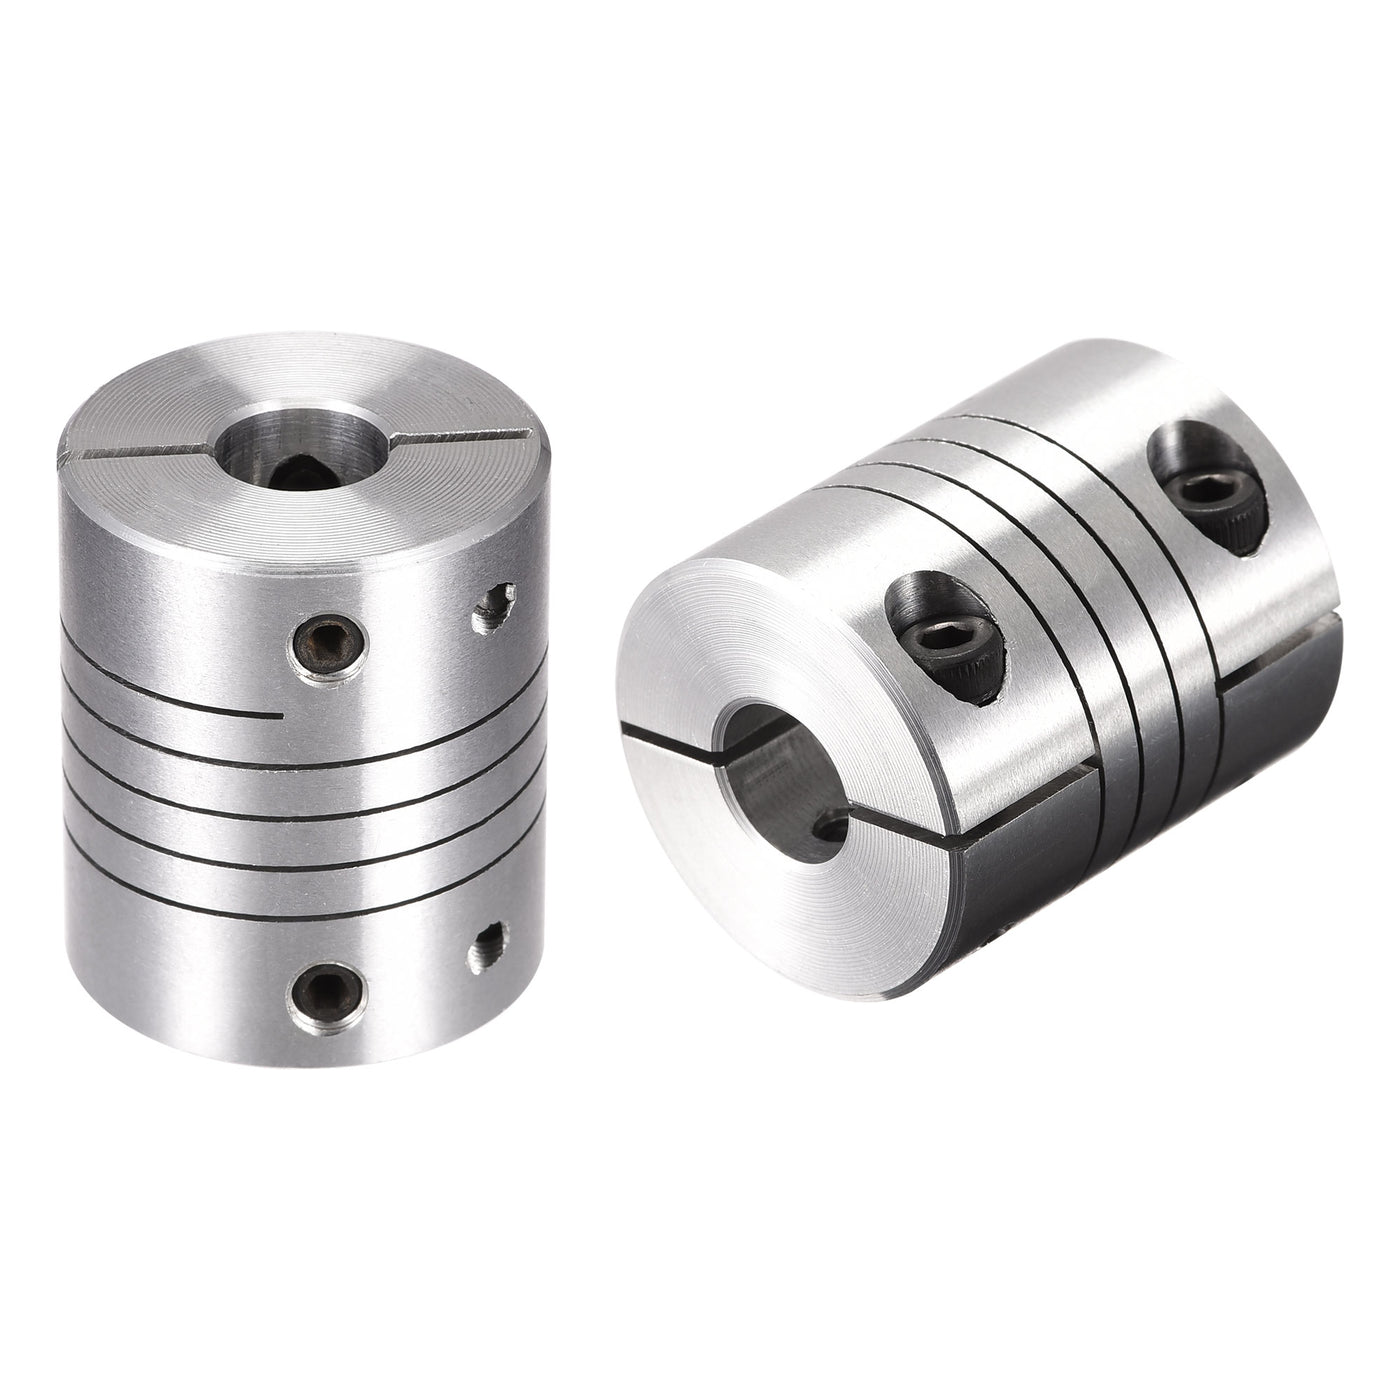 uxcell Uxcell 2PCS Motor Shaft 10mm to 10mm Helical Beam Coupler Coupling 25mm Dia 30mm Length